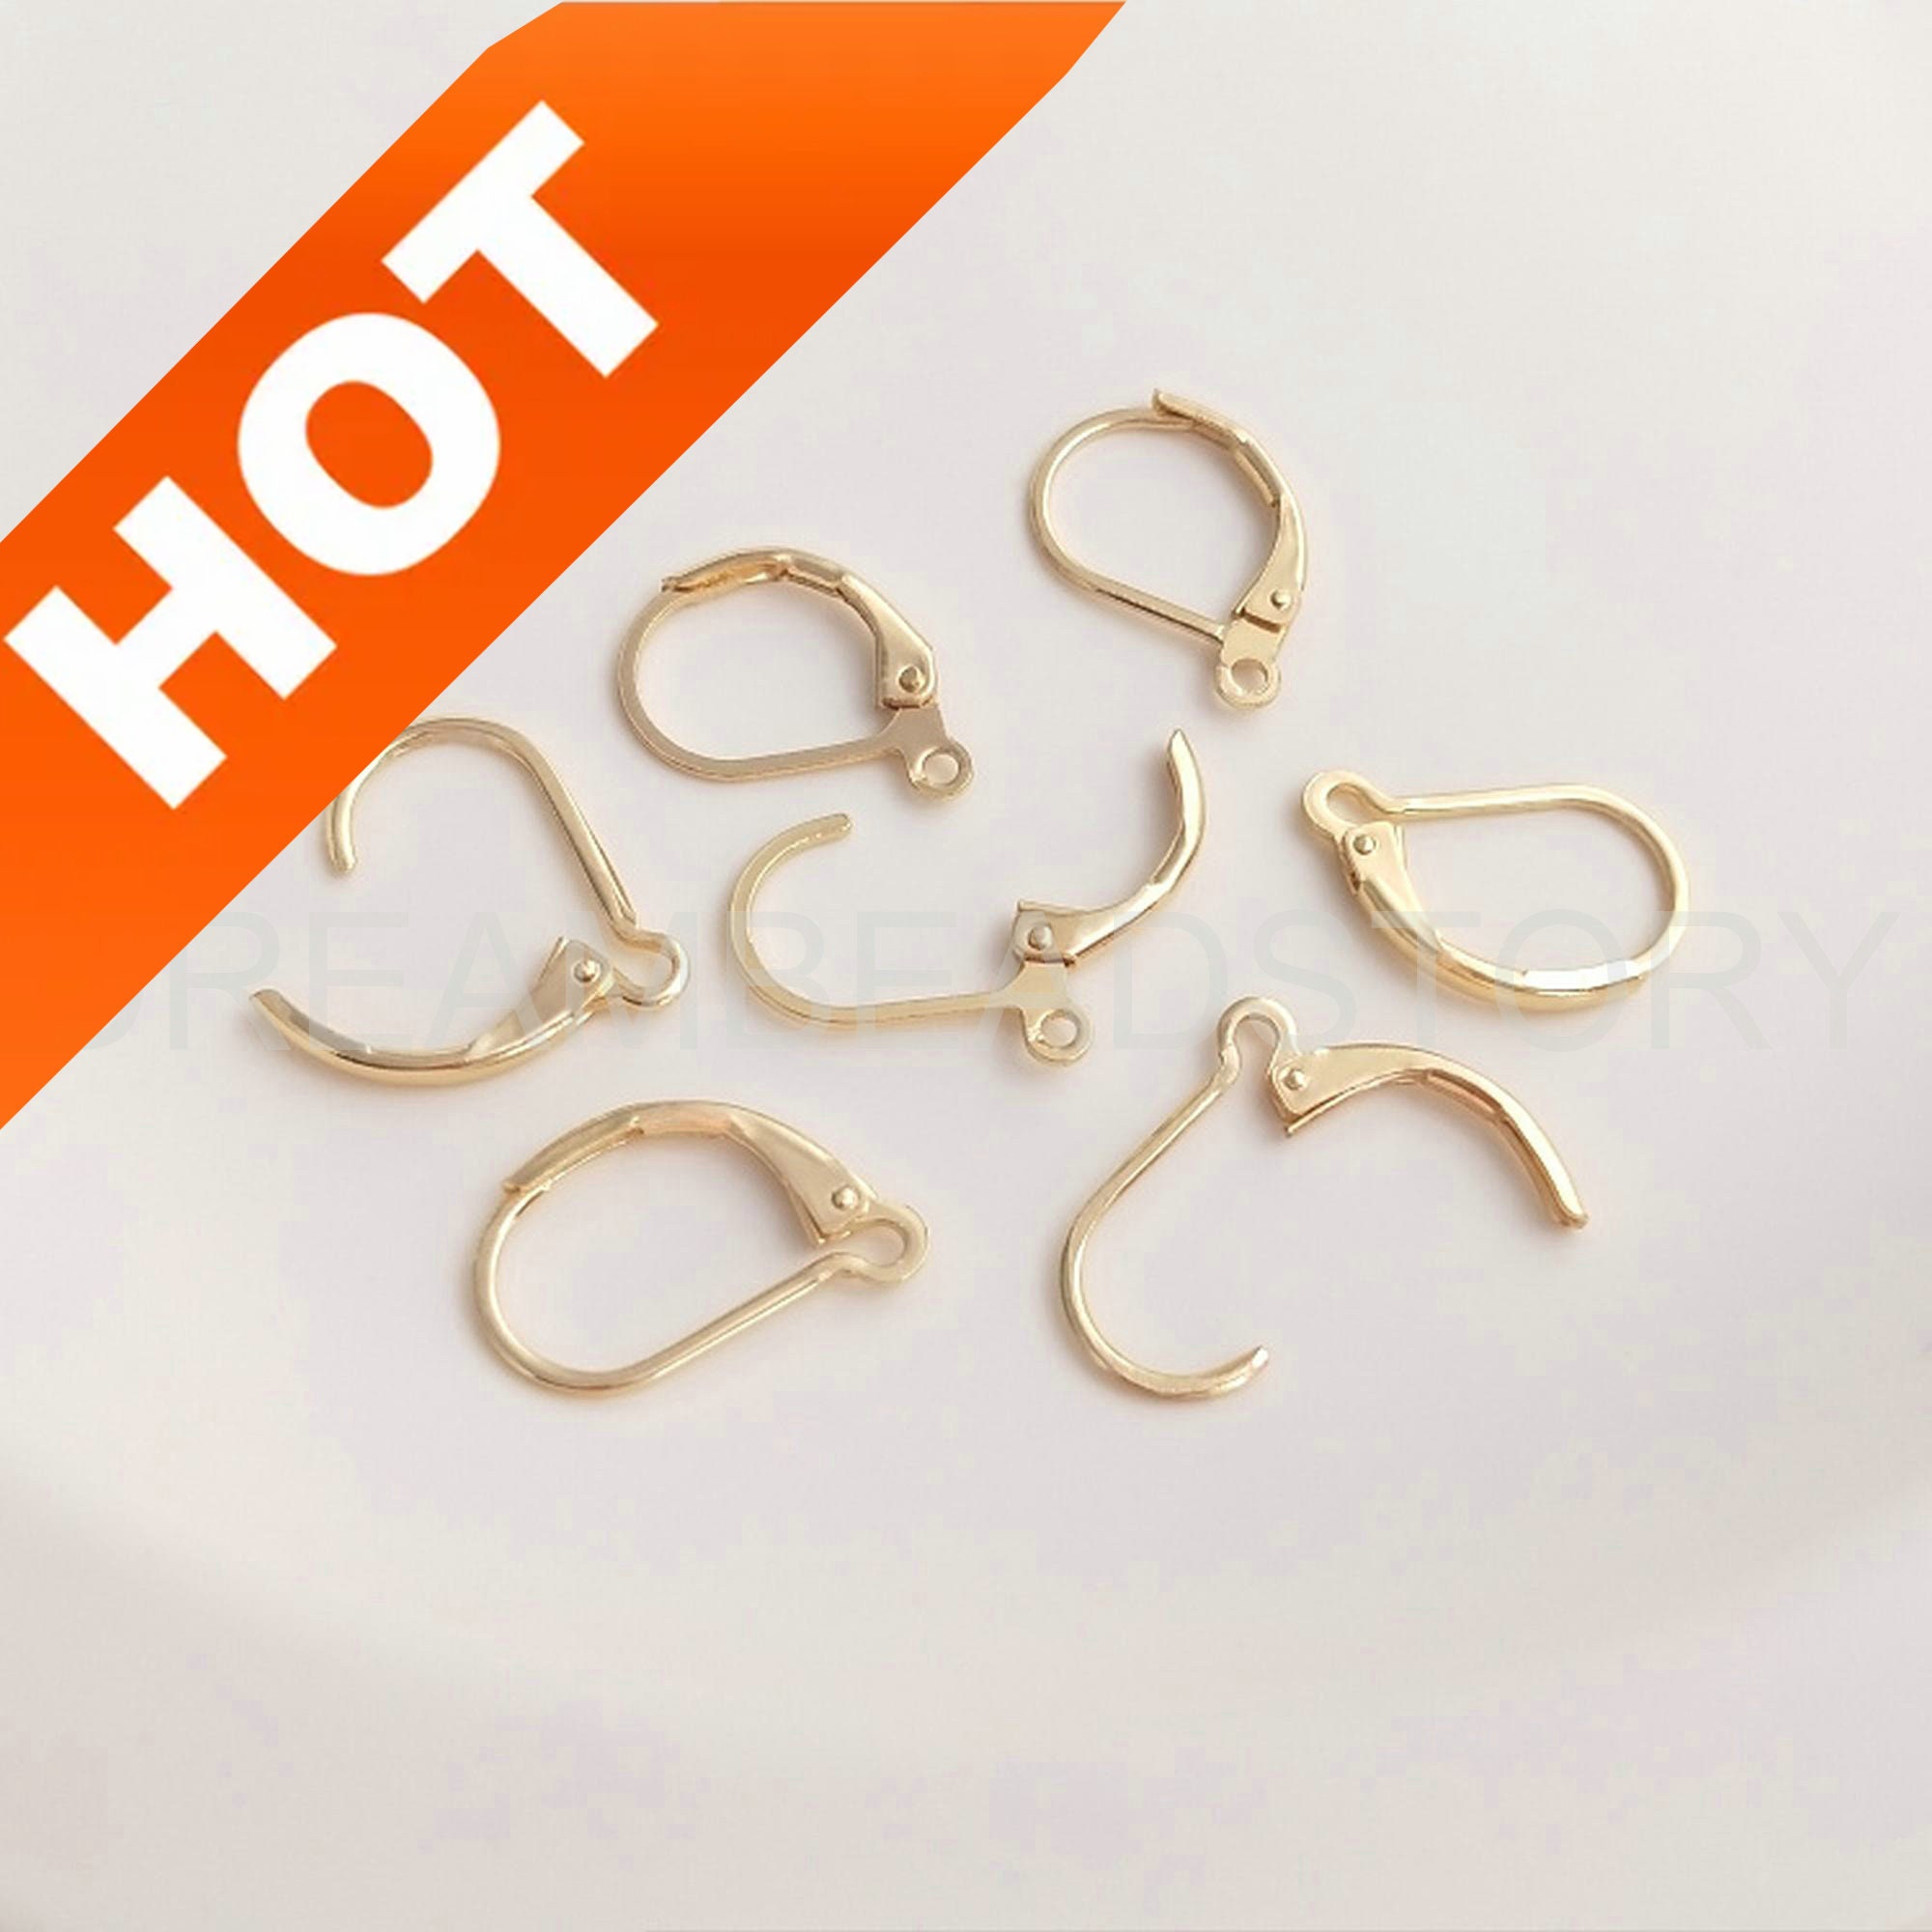 NBEADS 120 Pcs Lever Back Earrings, 3 Sizes Stainless Steel Open Loop  Leverback Hoops, French Hook Ear Wire for Earring Making Jewelry, Stainless